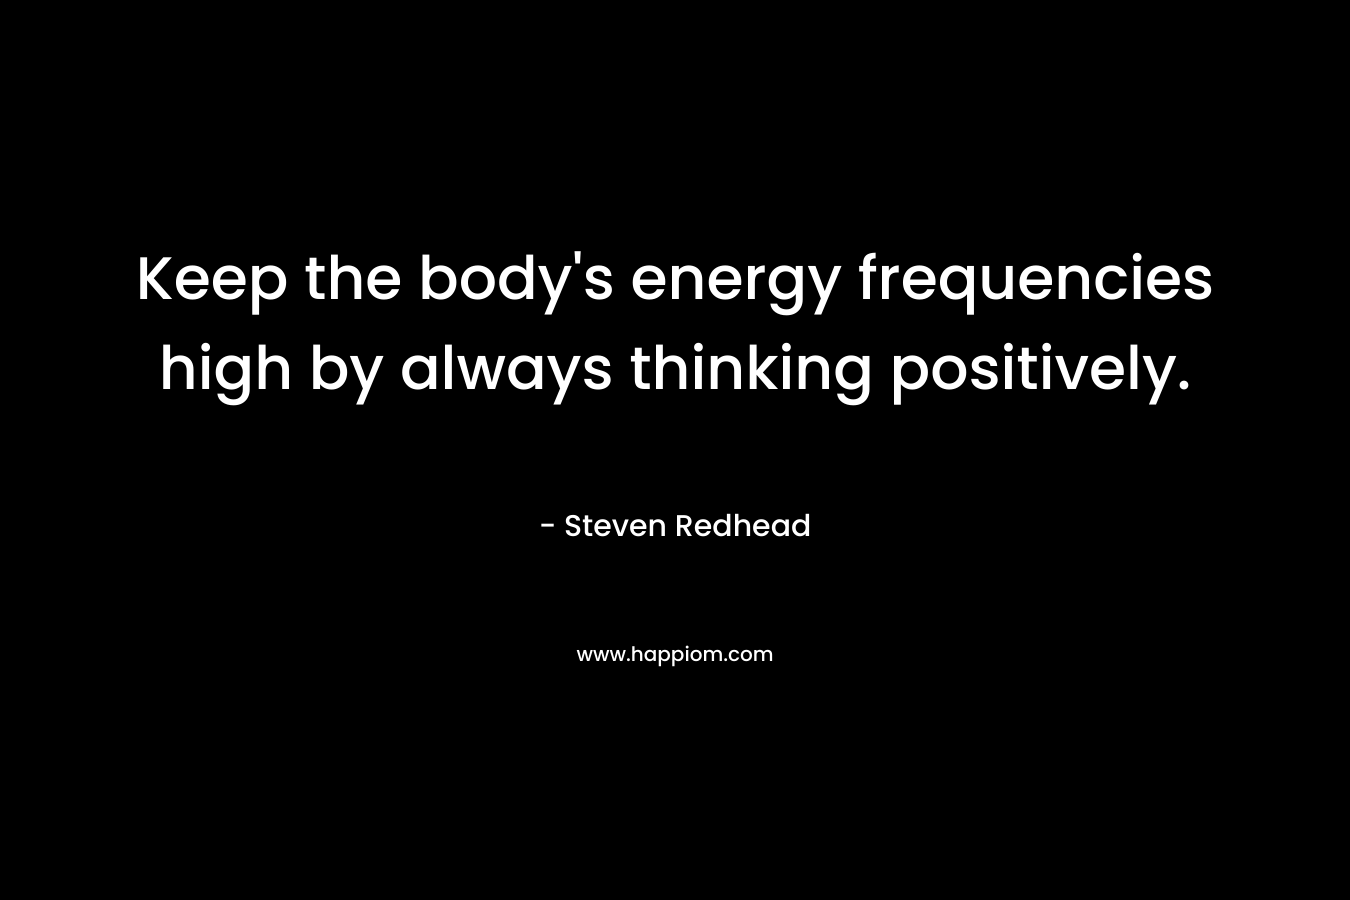 Keep the body’s energy frequencies high by always thinking positively. – Steven Redhead